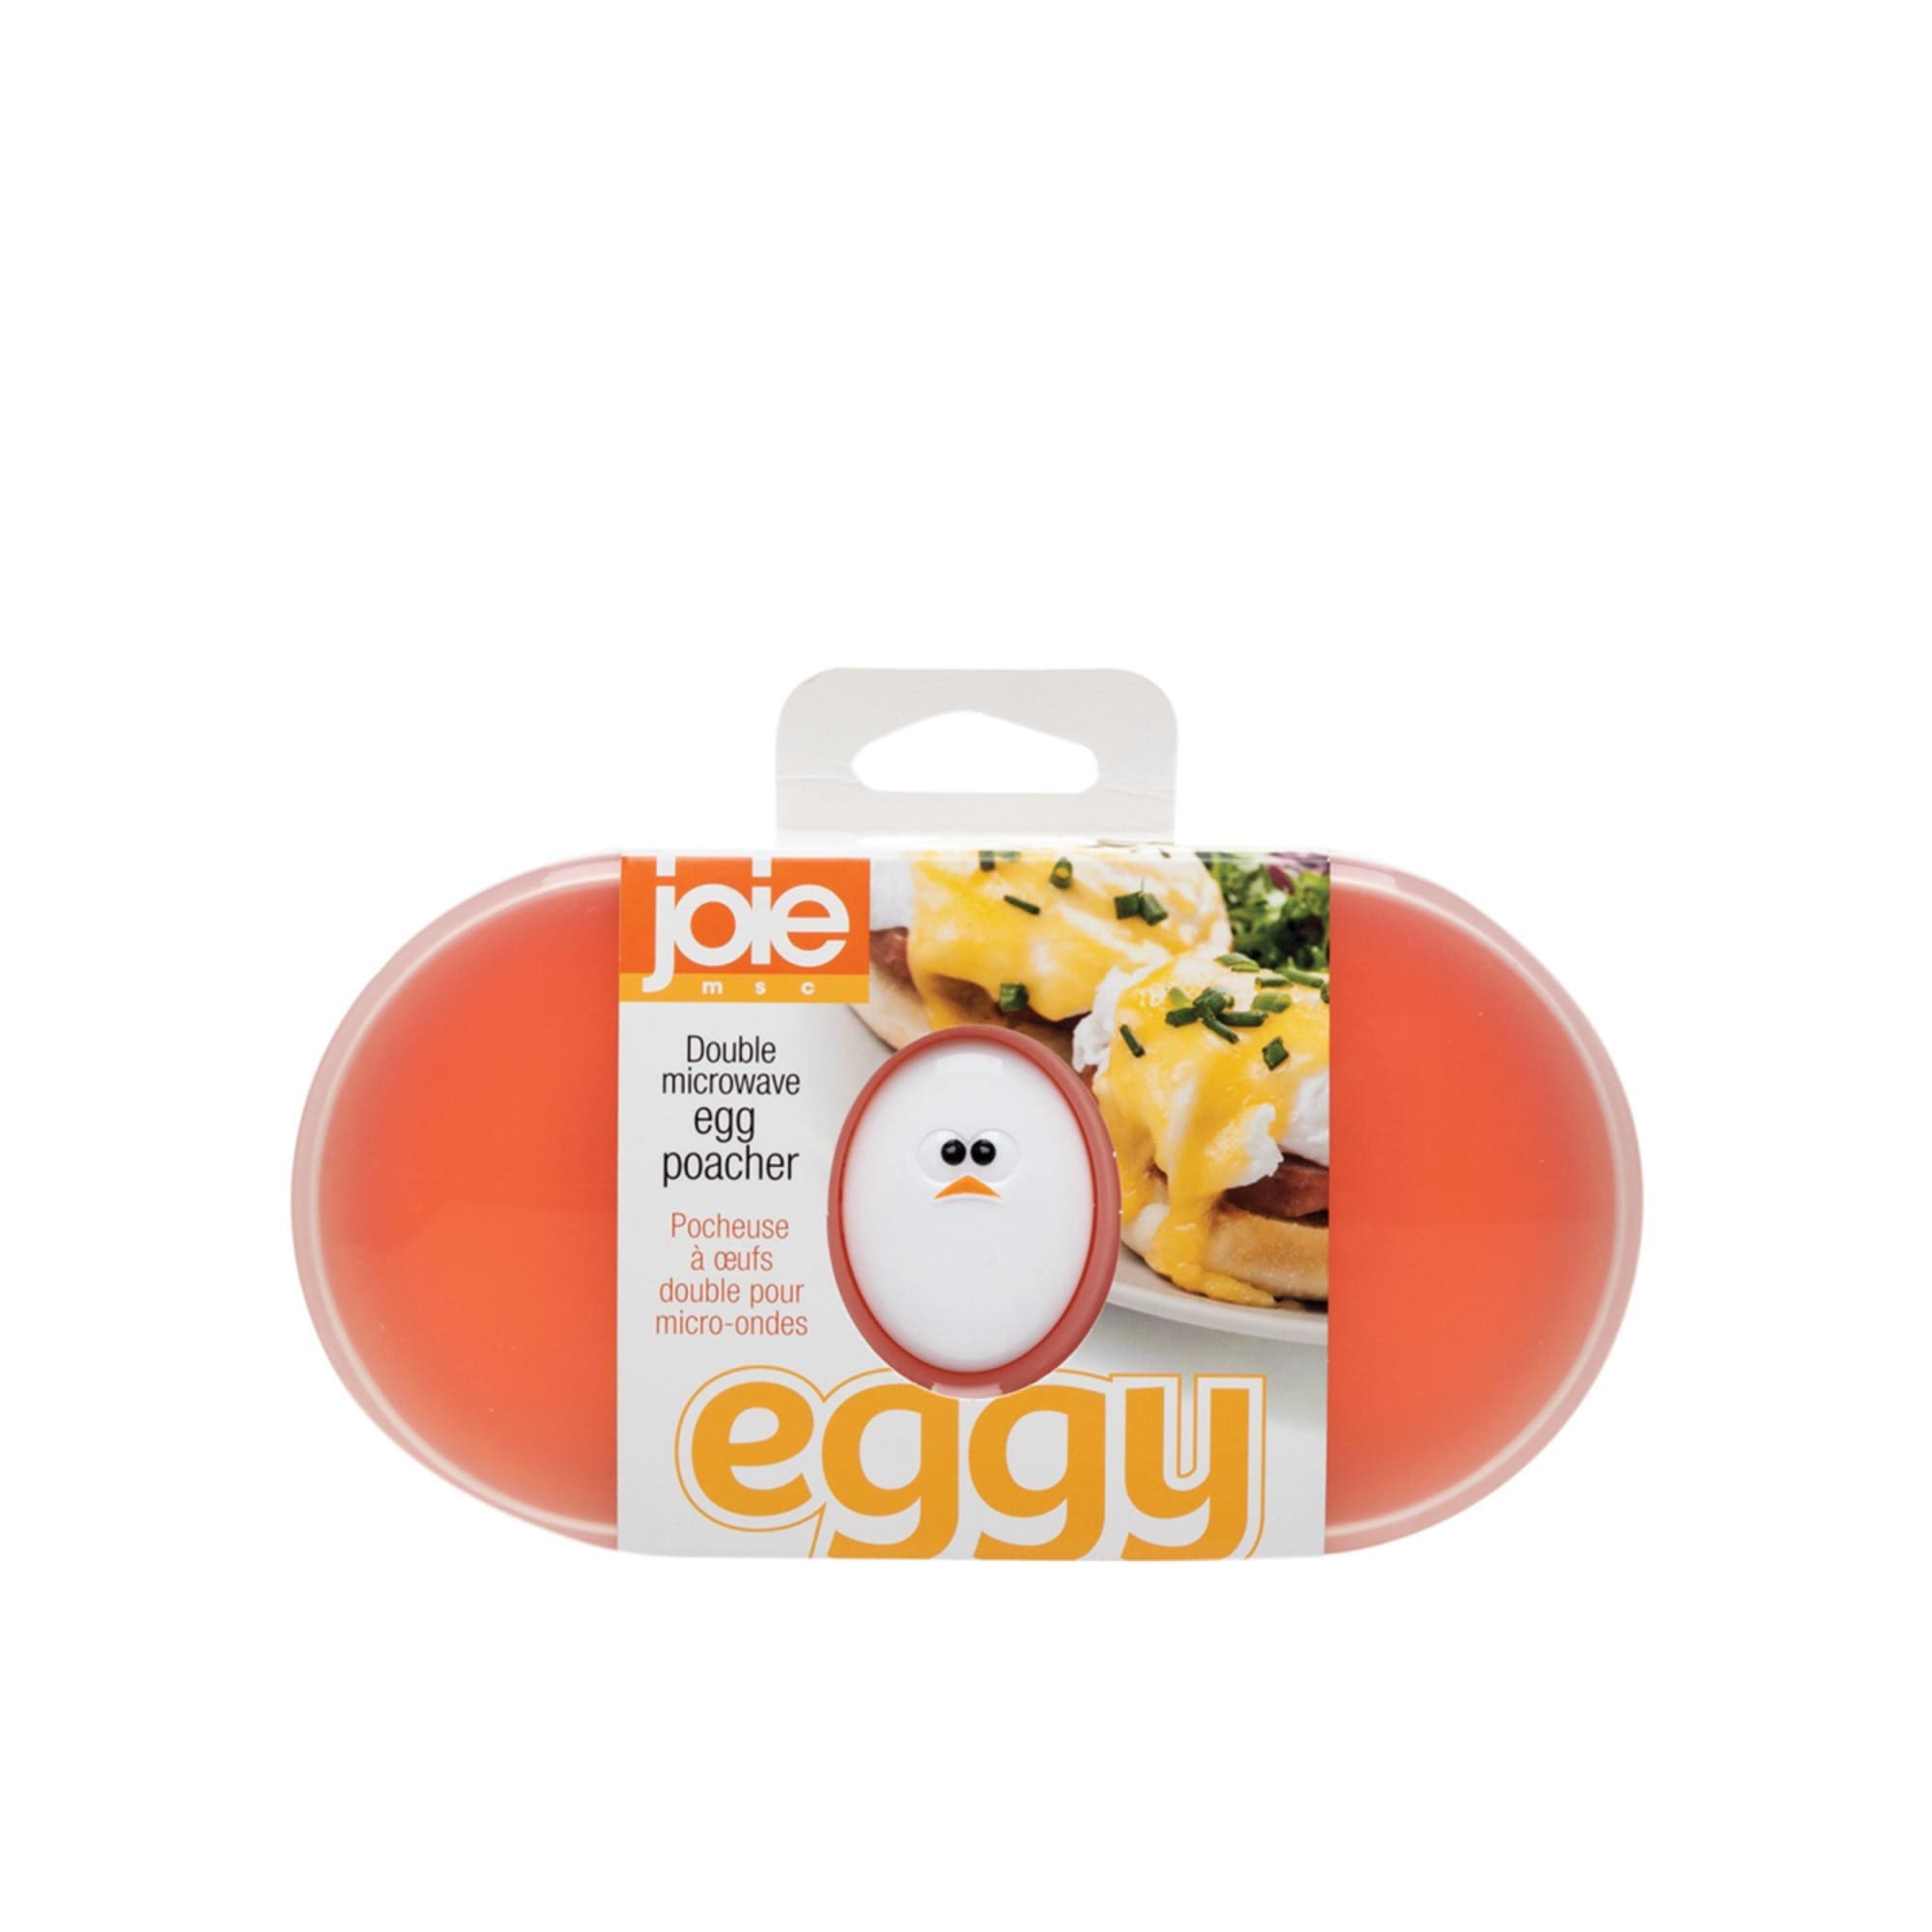 https://res.cloudinary.com/kitchenwarehouse/image/upload/c_fill,g_face,w_1250/f_auto/t_PDP_2000x2000/Supplier%20Images%20/2000px/Joie-Eggy-Double-Microwave-Egg-Poacher_1_2000px.jpg